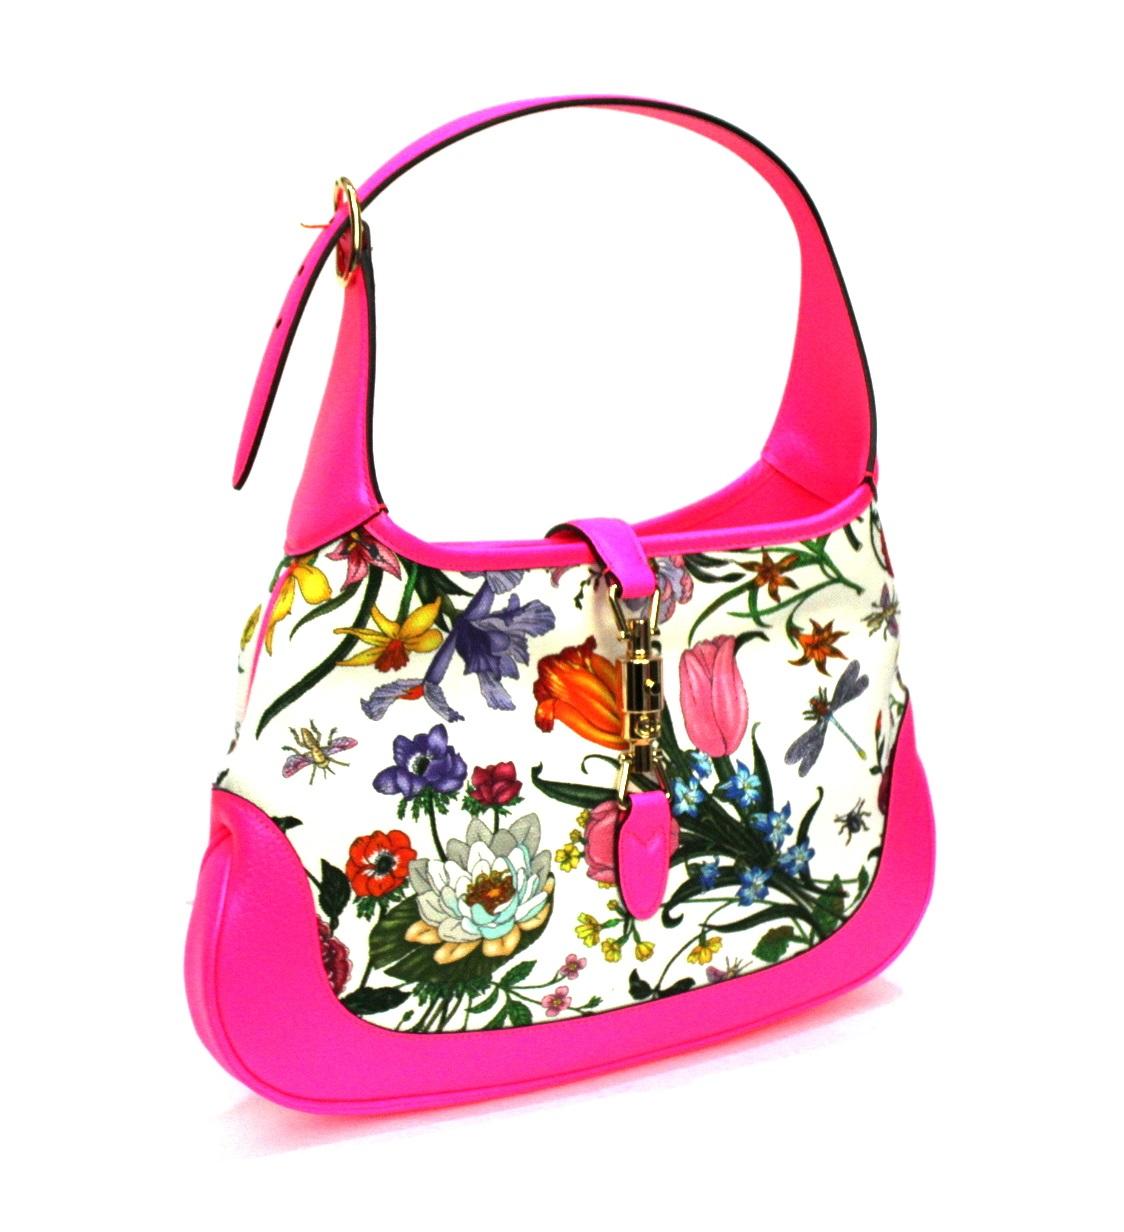 Gucci bag model Jackie Flora line made of canvas with floral pattern and fluo pink leather. Closure with golden hook, internally quite large. Equipped with top handle to wear it comfortably on the shoulder. Conditions like new